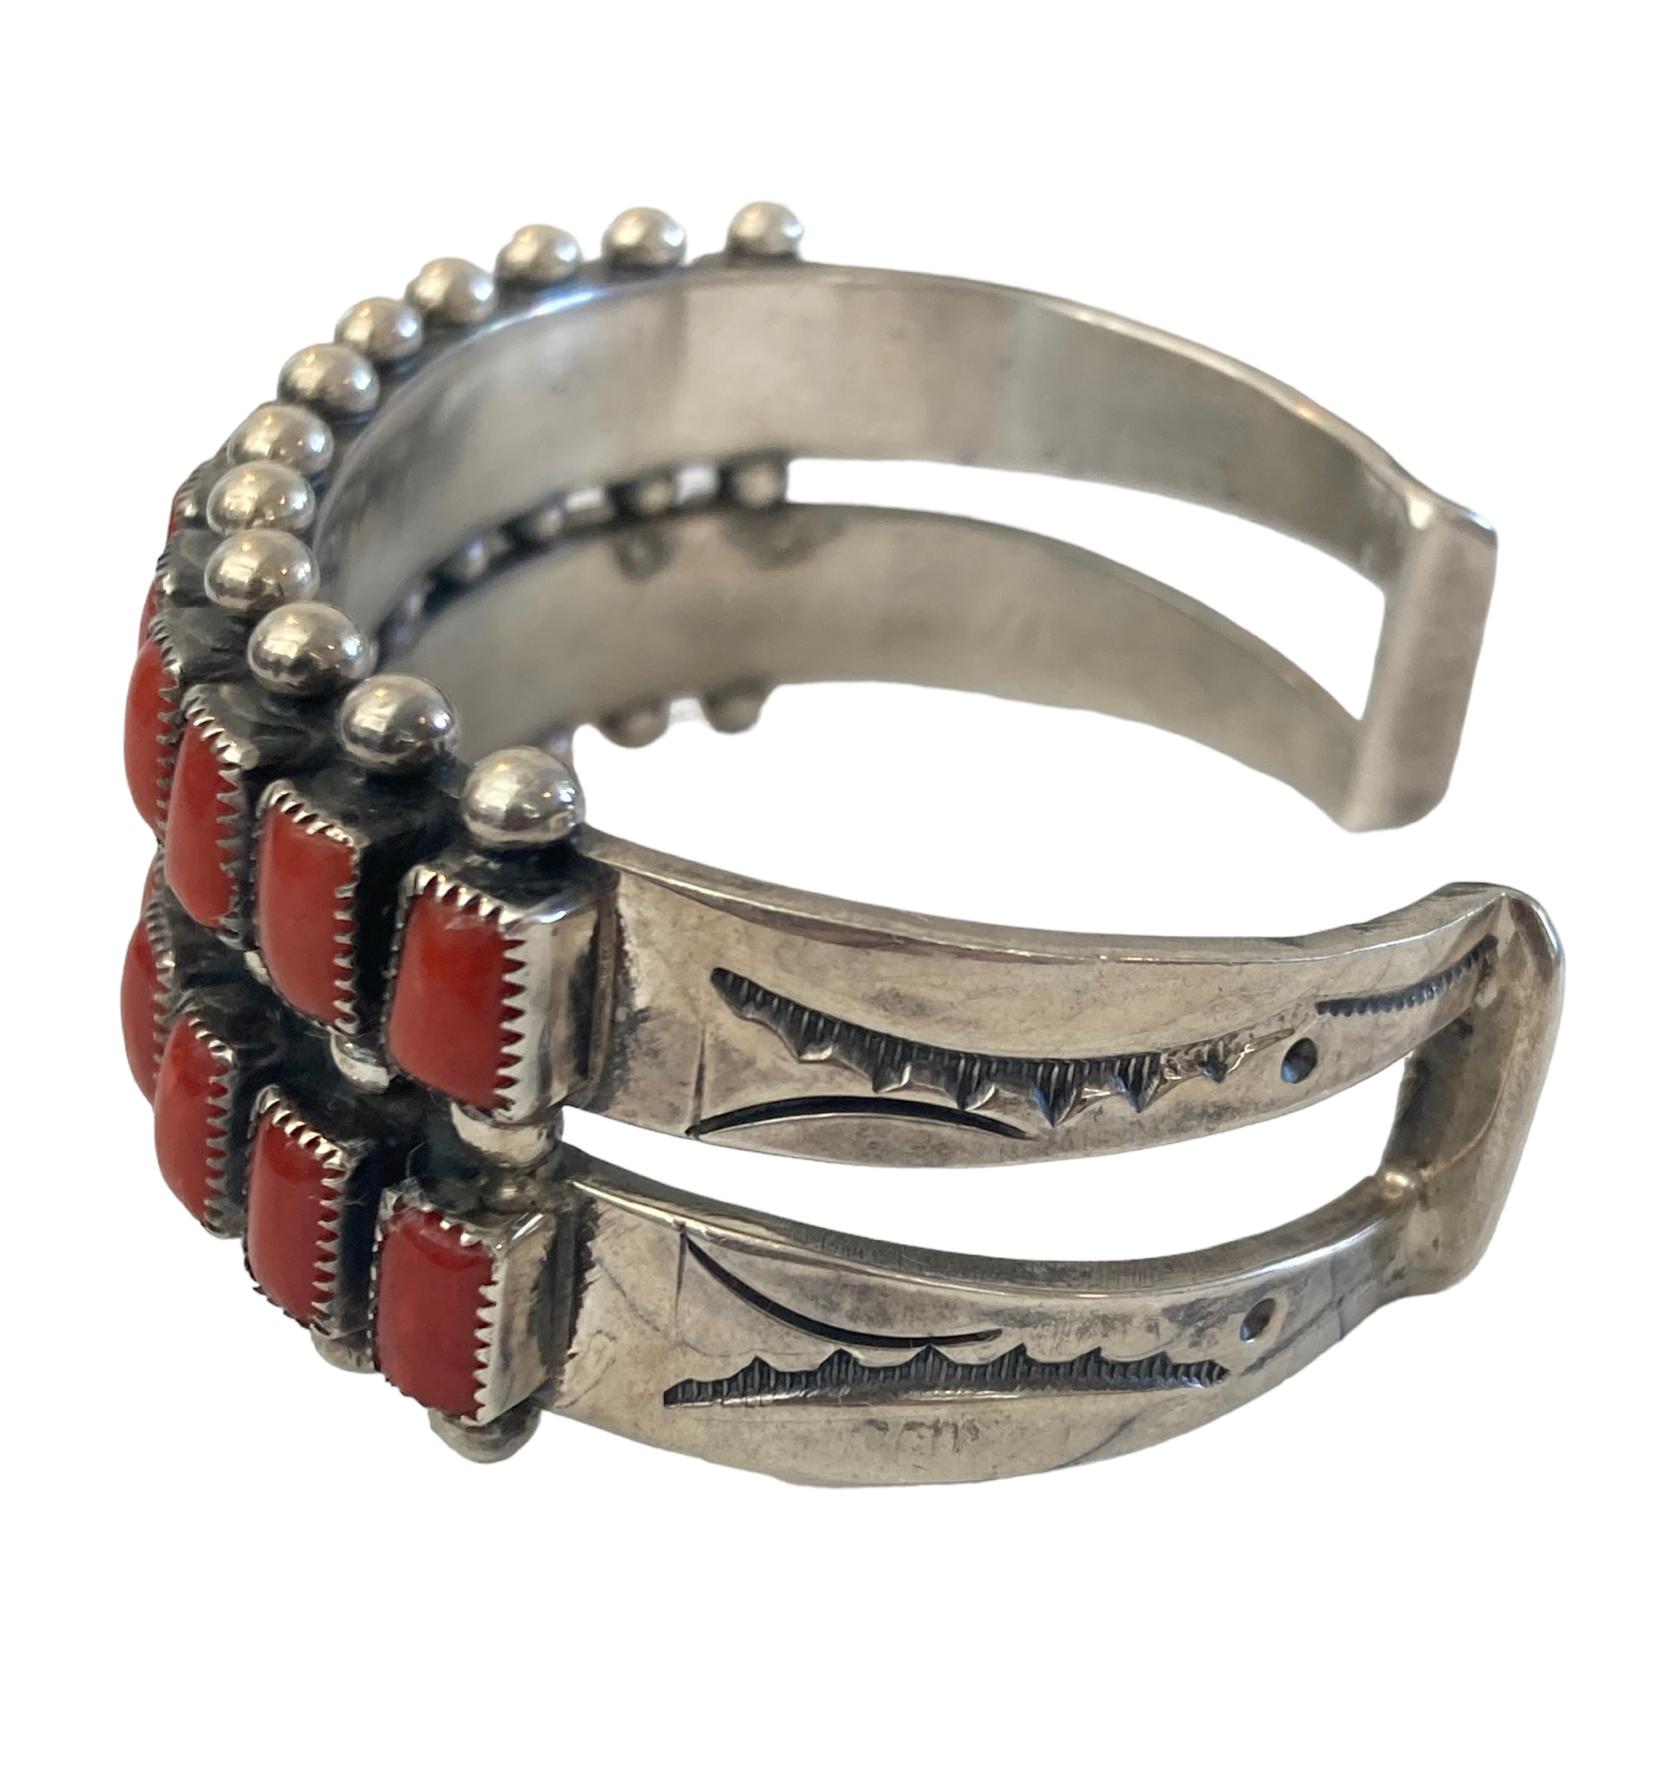 This Striking Navajo Sterling Silver Red Coral Channel Cuff Bracelet is unlike any I've seen in my 30 years of offering fine jewelry. This mid-century piece weighs an impressive 71.71g. The channel work is impeccable as are the hand-stamped sides,